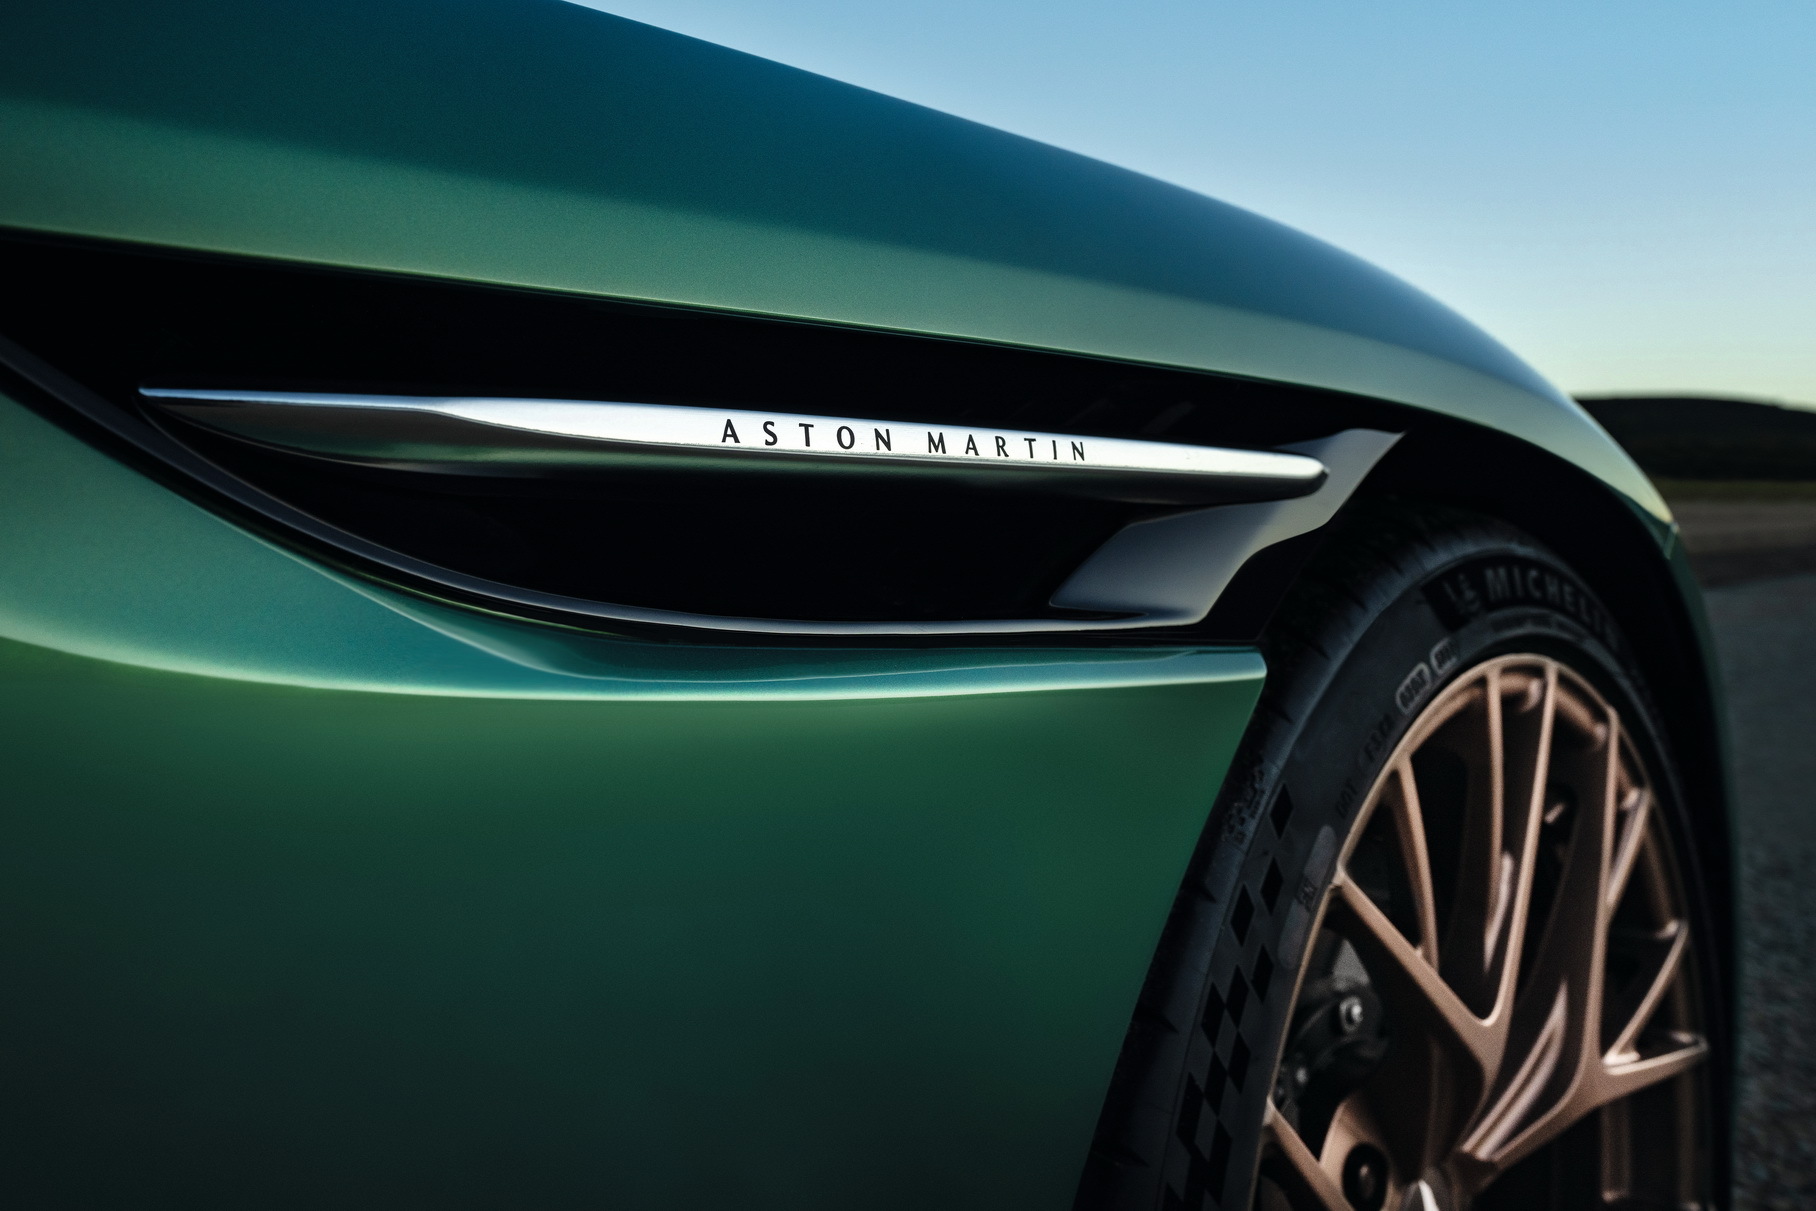 Aston Martin is preparing for the premiere of a new supercar